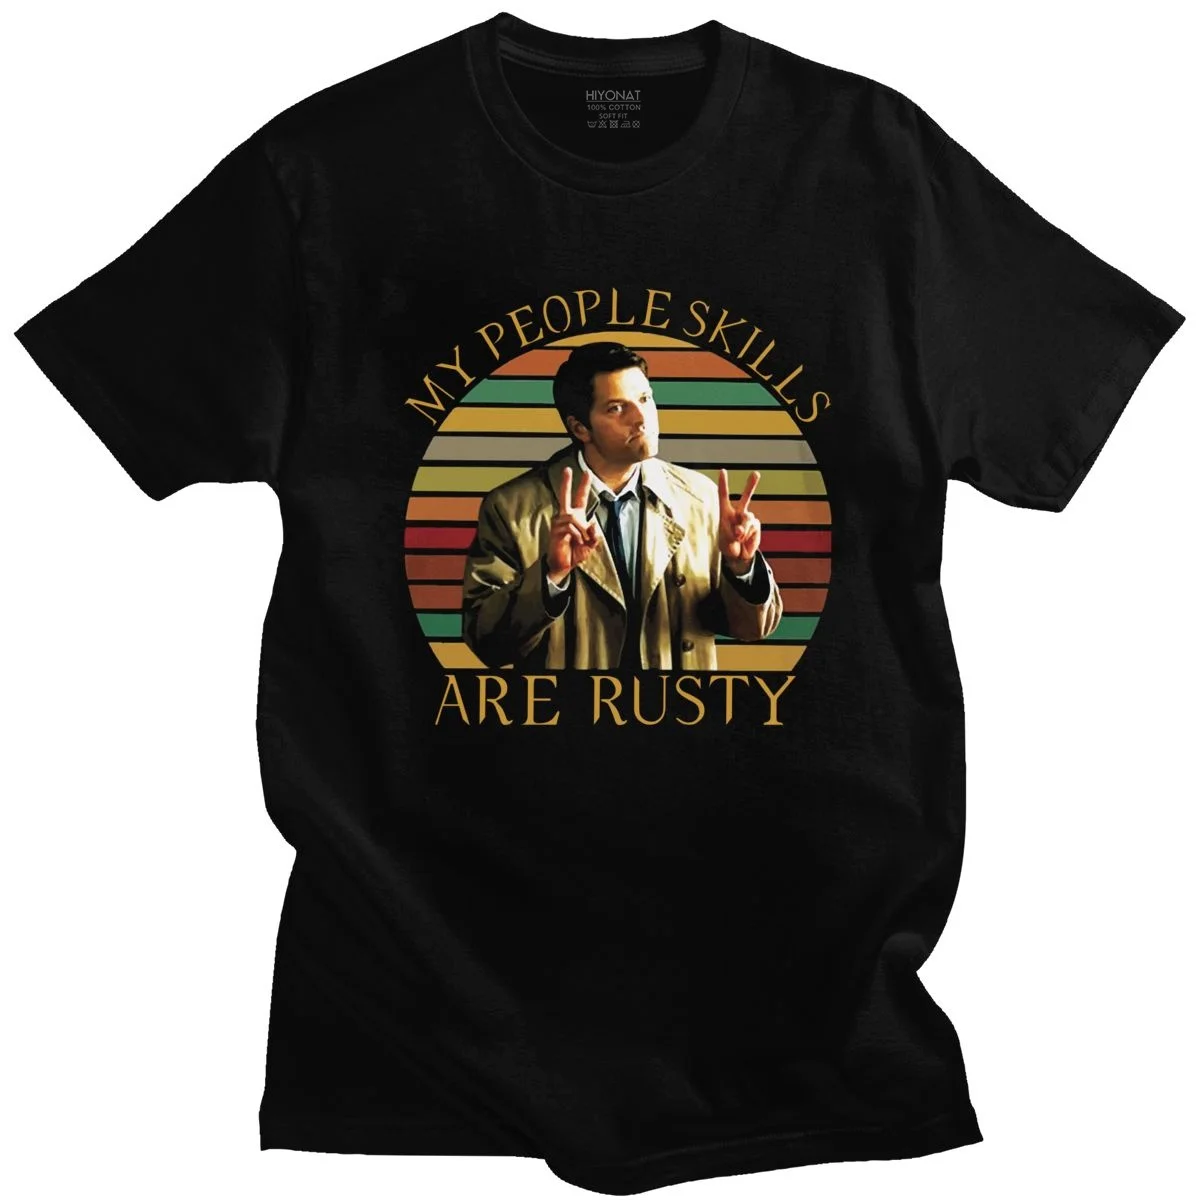 

Supernatural My People Skills Are Rusty T Shirt for Men Soft Cotton Fashion T-shirt Short Sleeves Funny TV Castiel Tee Clothing